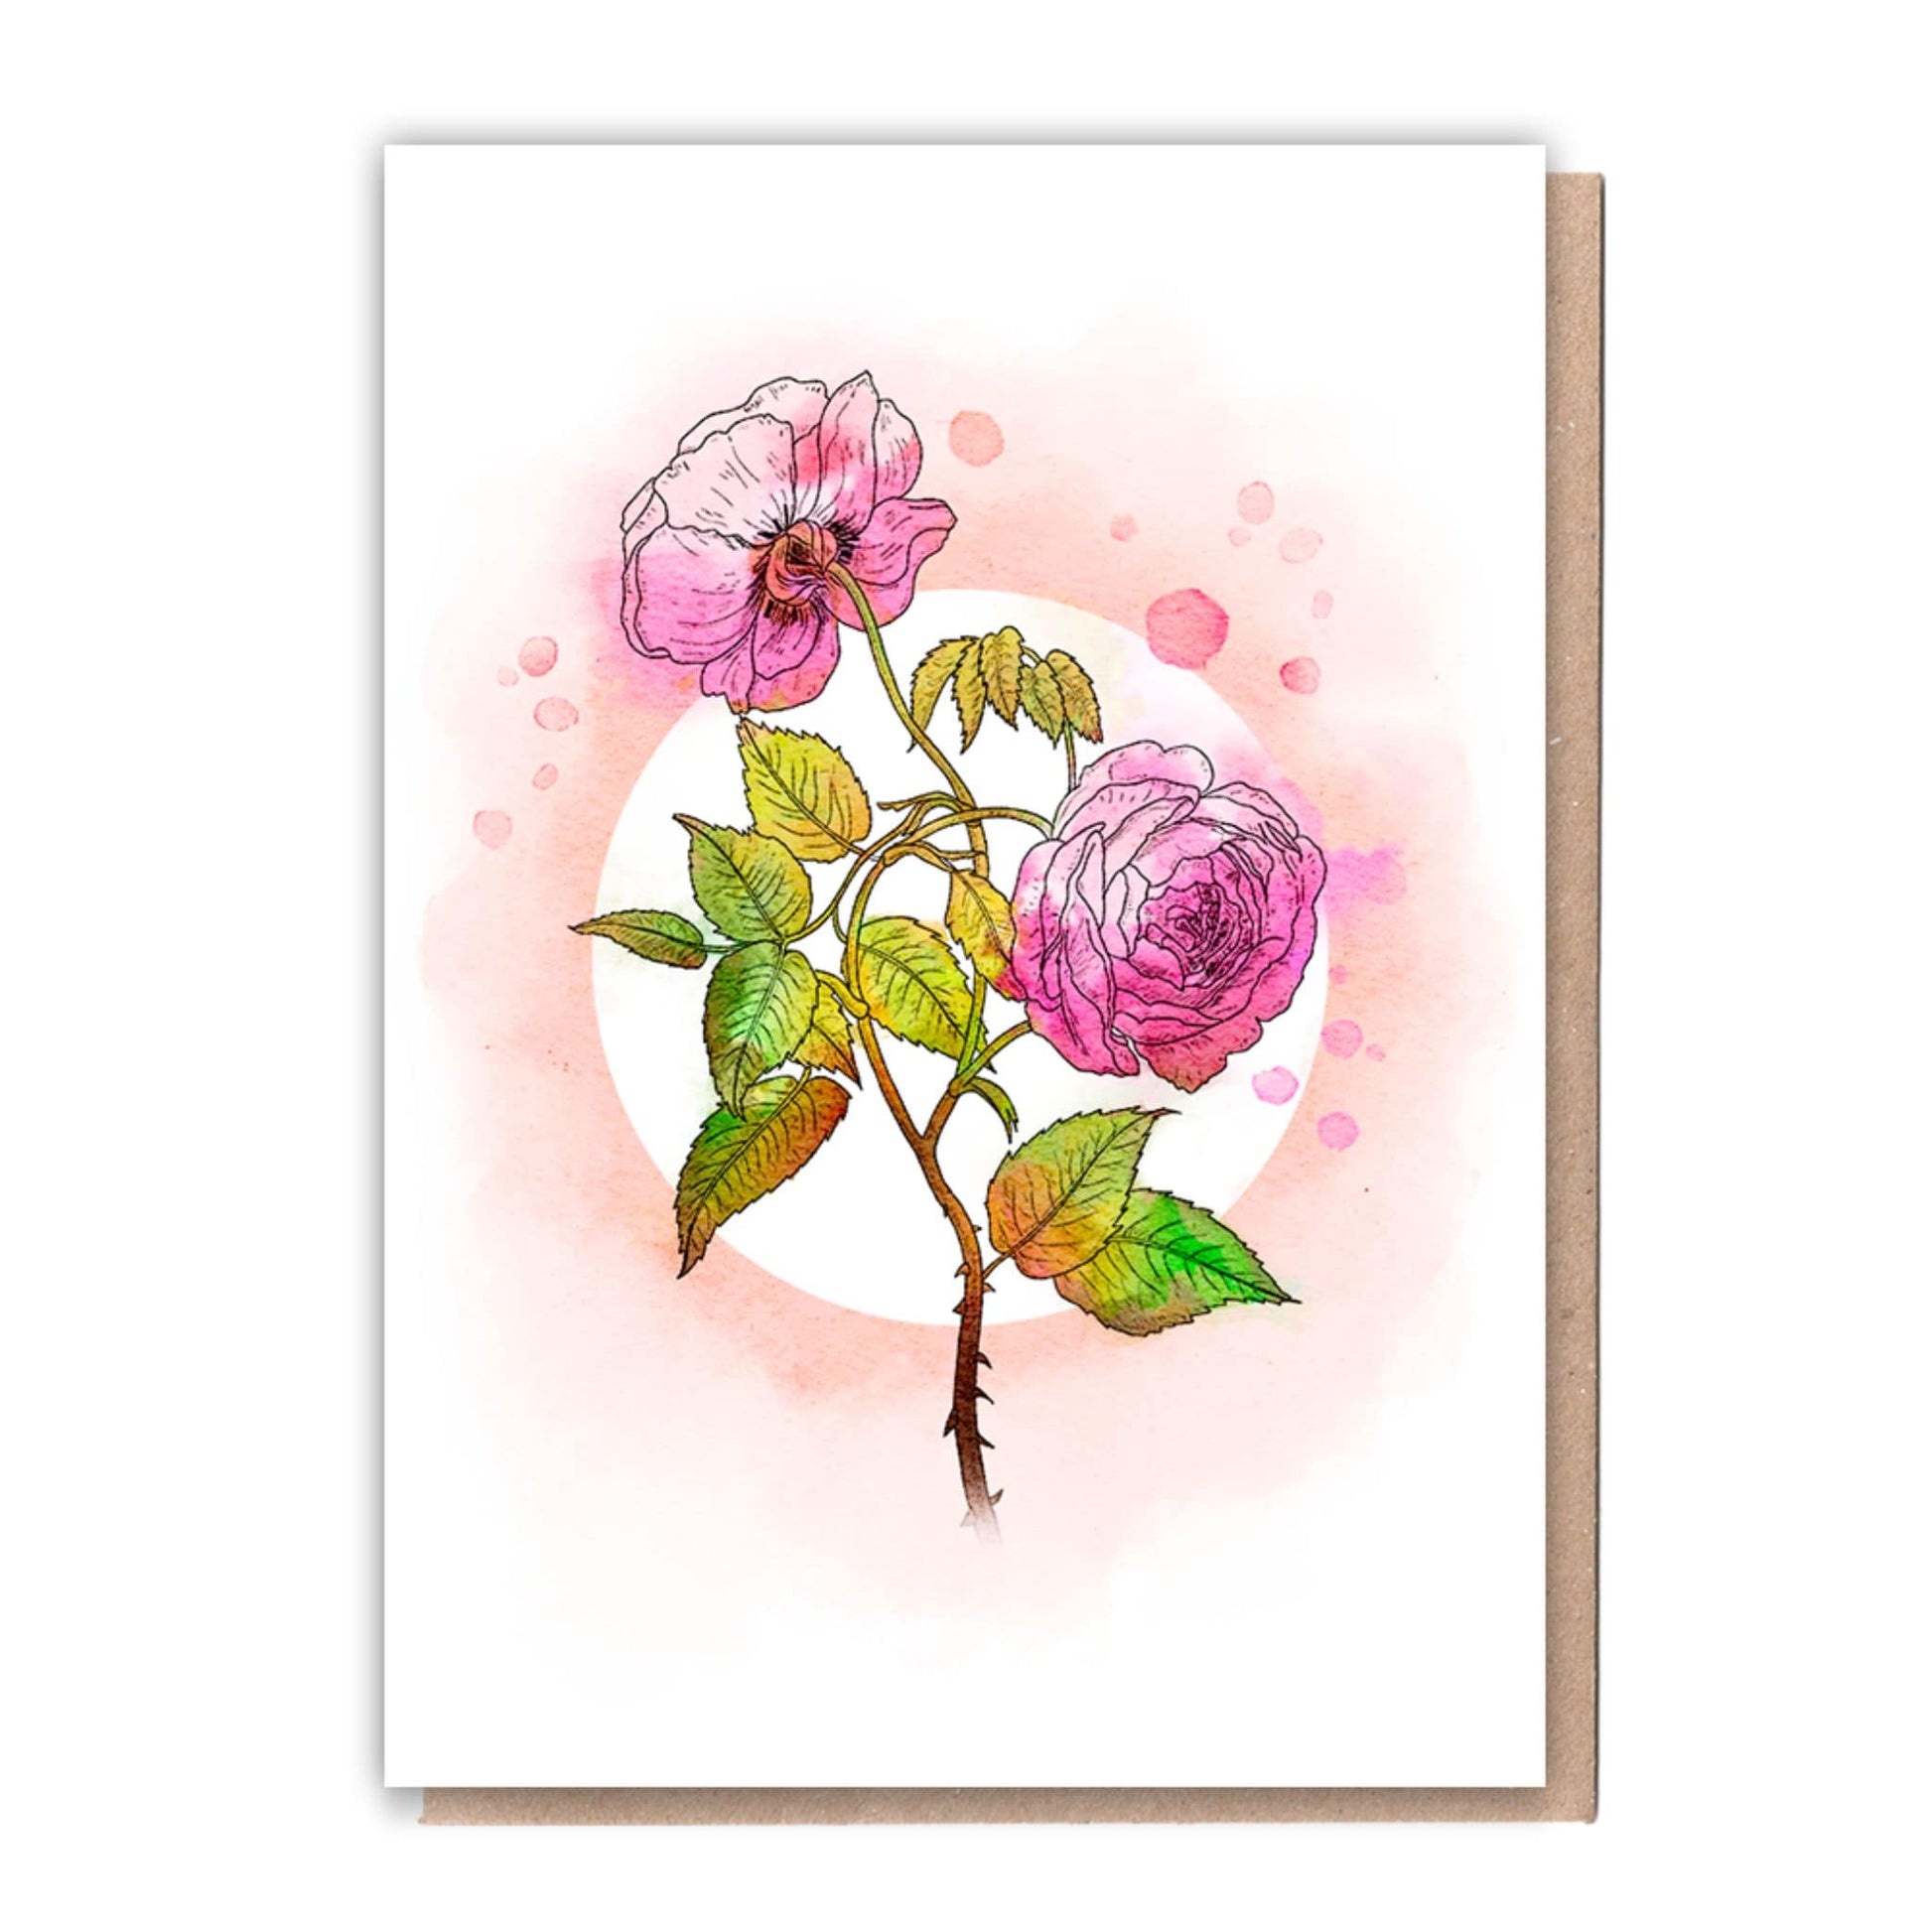 Recycled Greetings Card Box  5 Cards + 10 Trees Planted  Nature Lover - roses